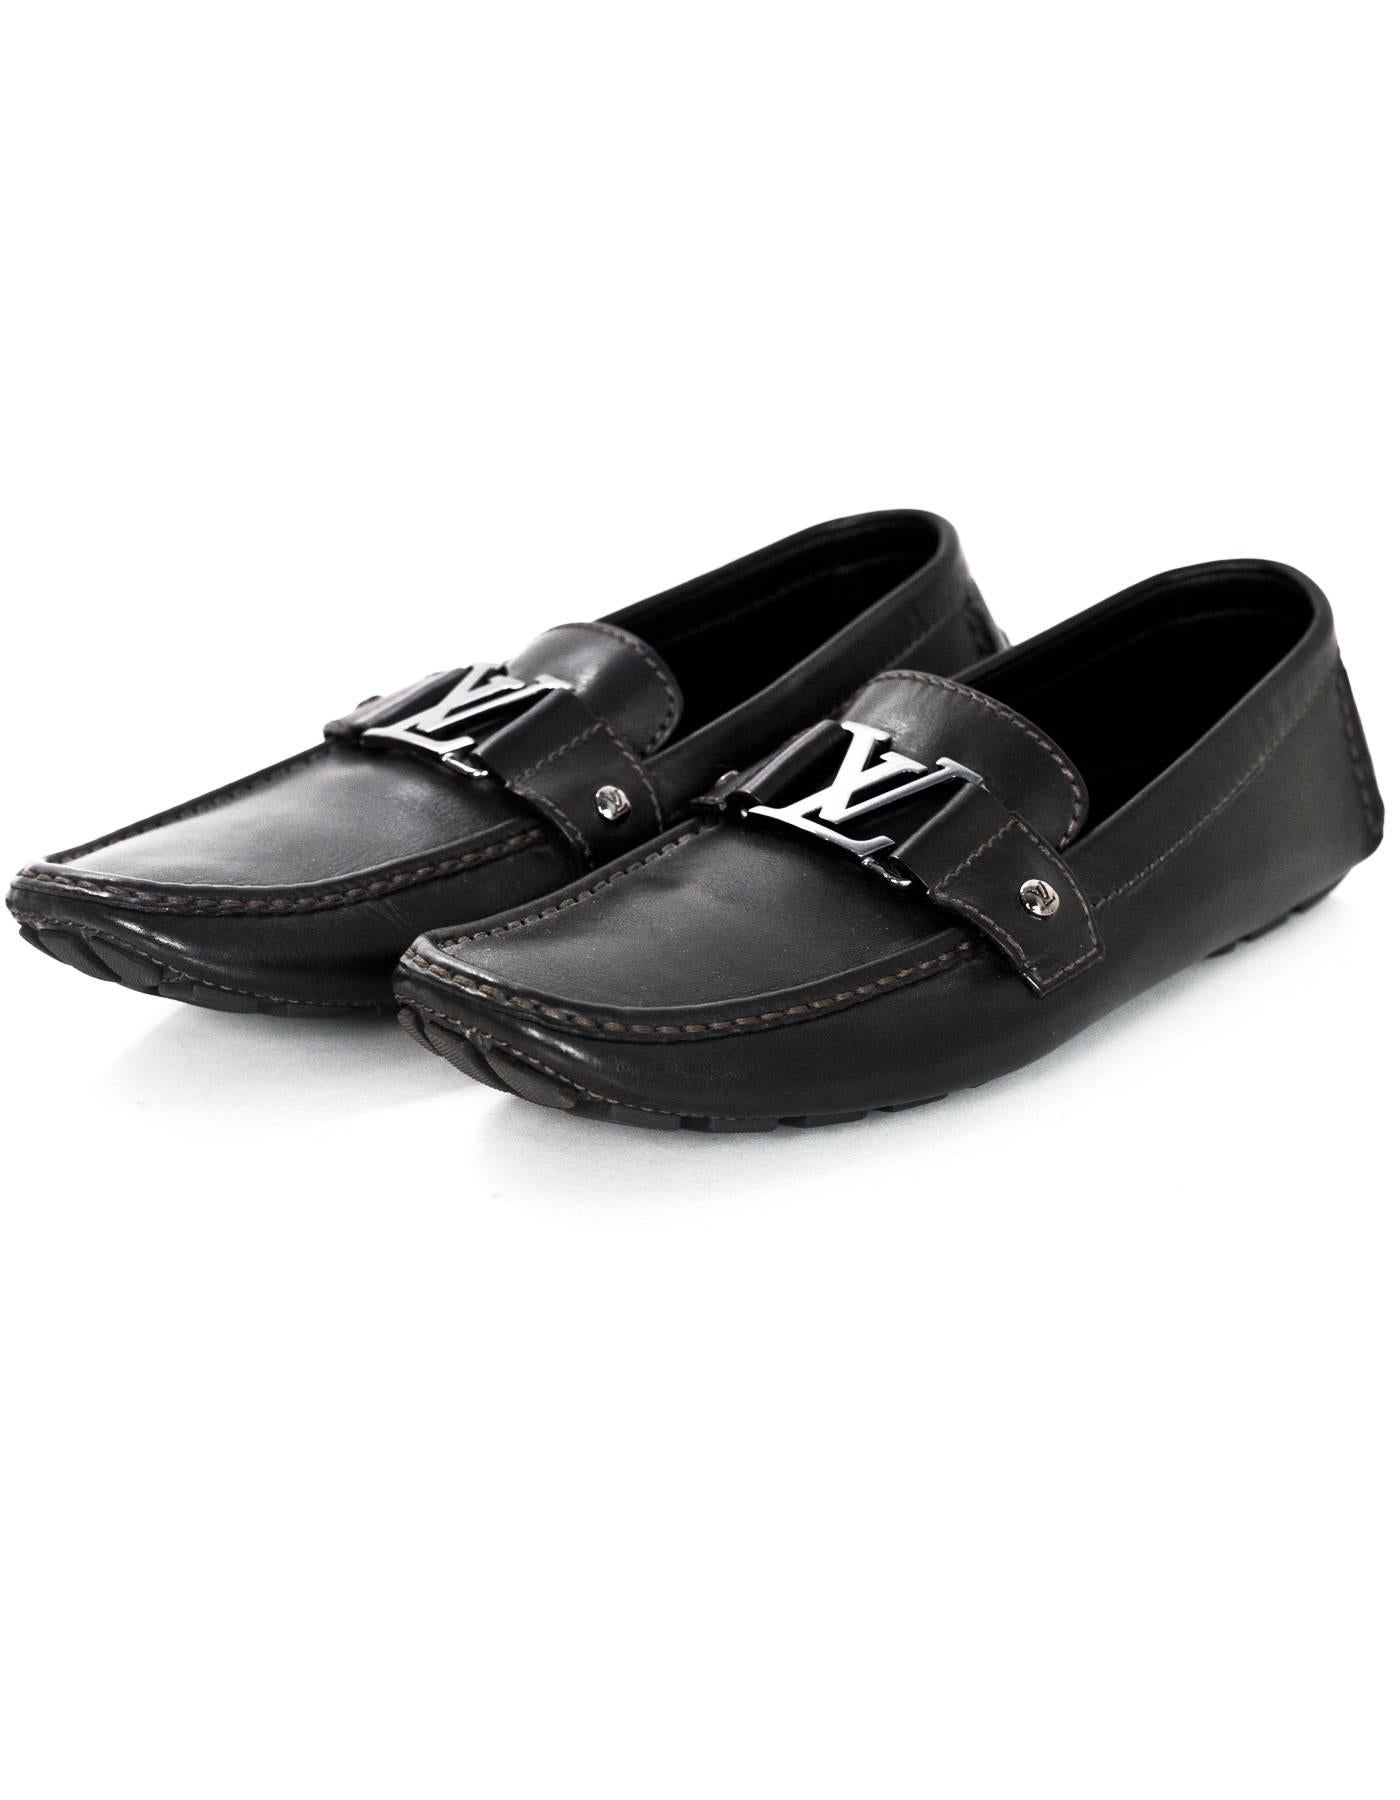 louis vuitton loafers monte carlo